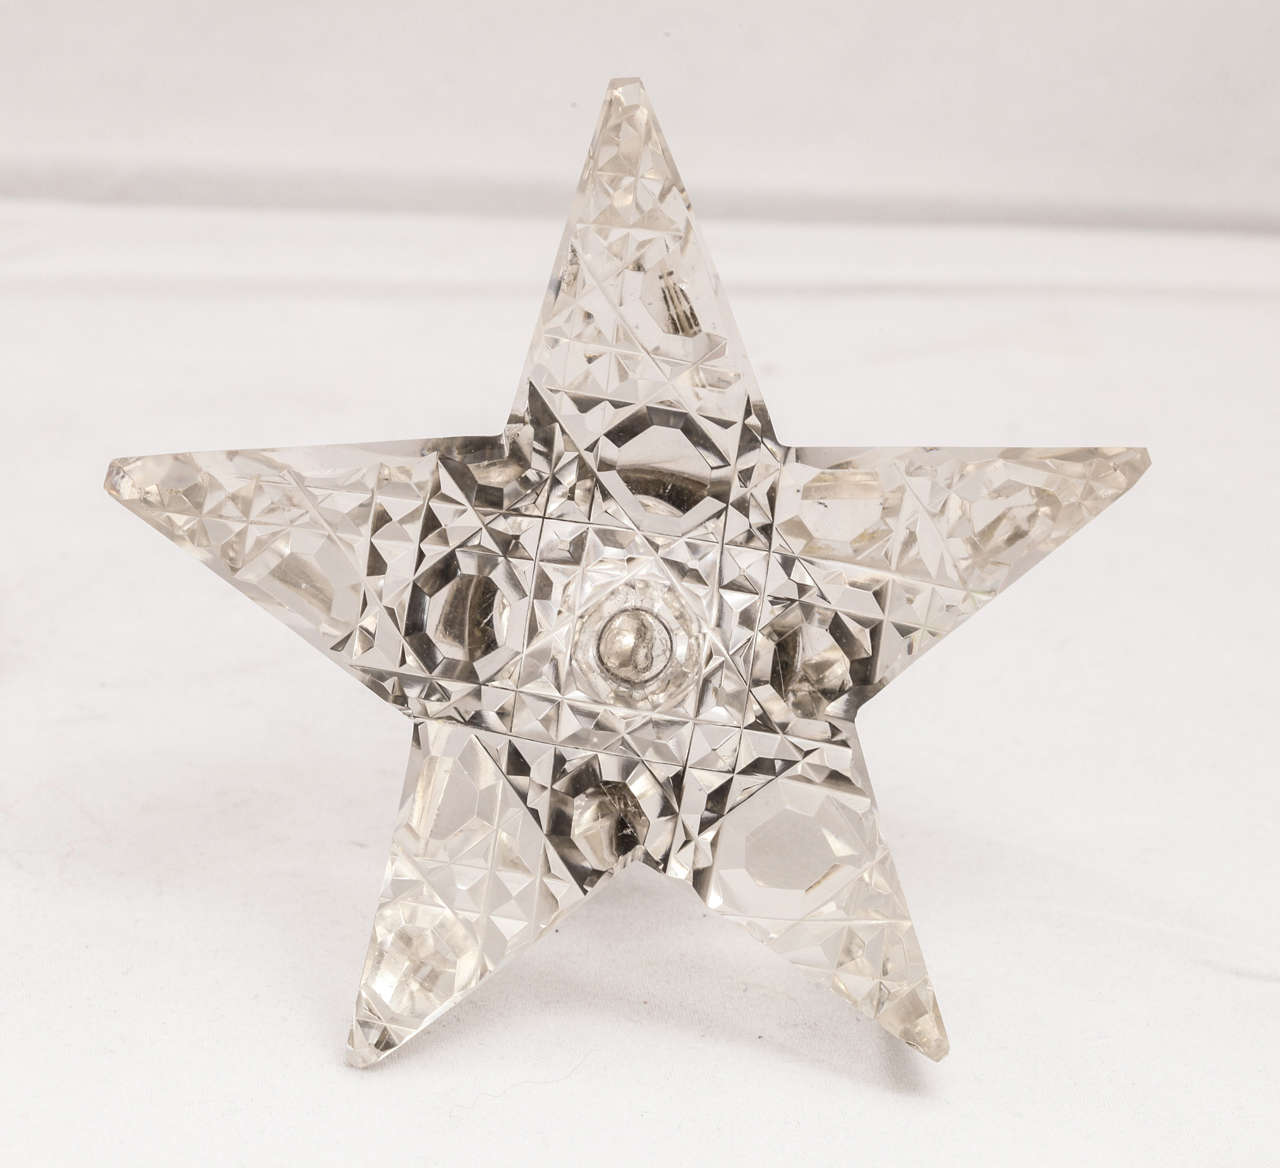 Unusual, Victorian, sterling silver-mounted, star-form crystal inkwell, Birmingham, England, 1900, A.W. Penington - maker. Underside of crystal base is hobnail-cut; these cuts are reflected in the clear, five 